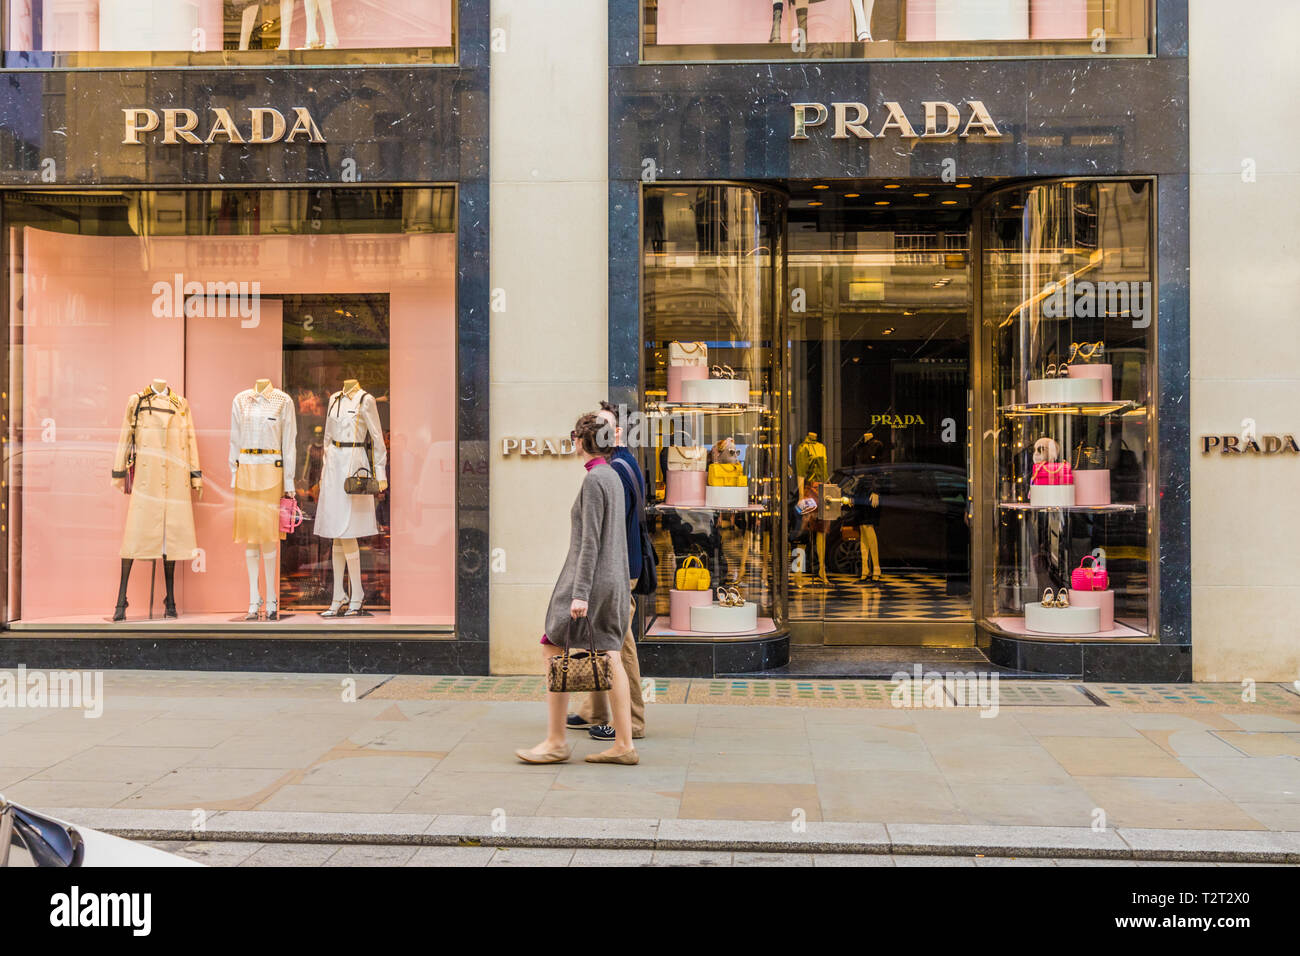 April 2019. London. A view of the Prada store on Bond street in london ...